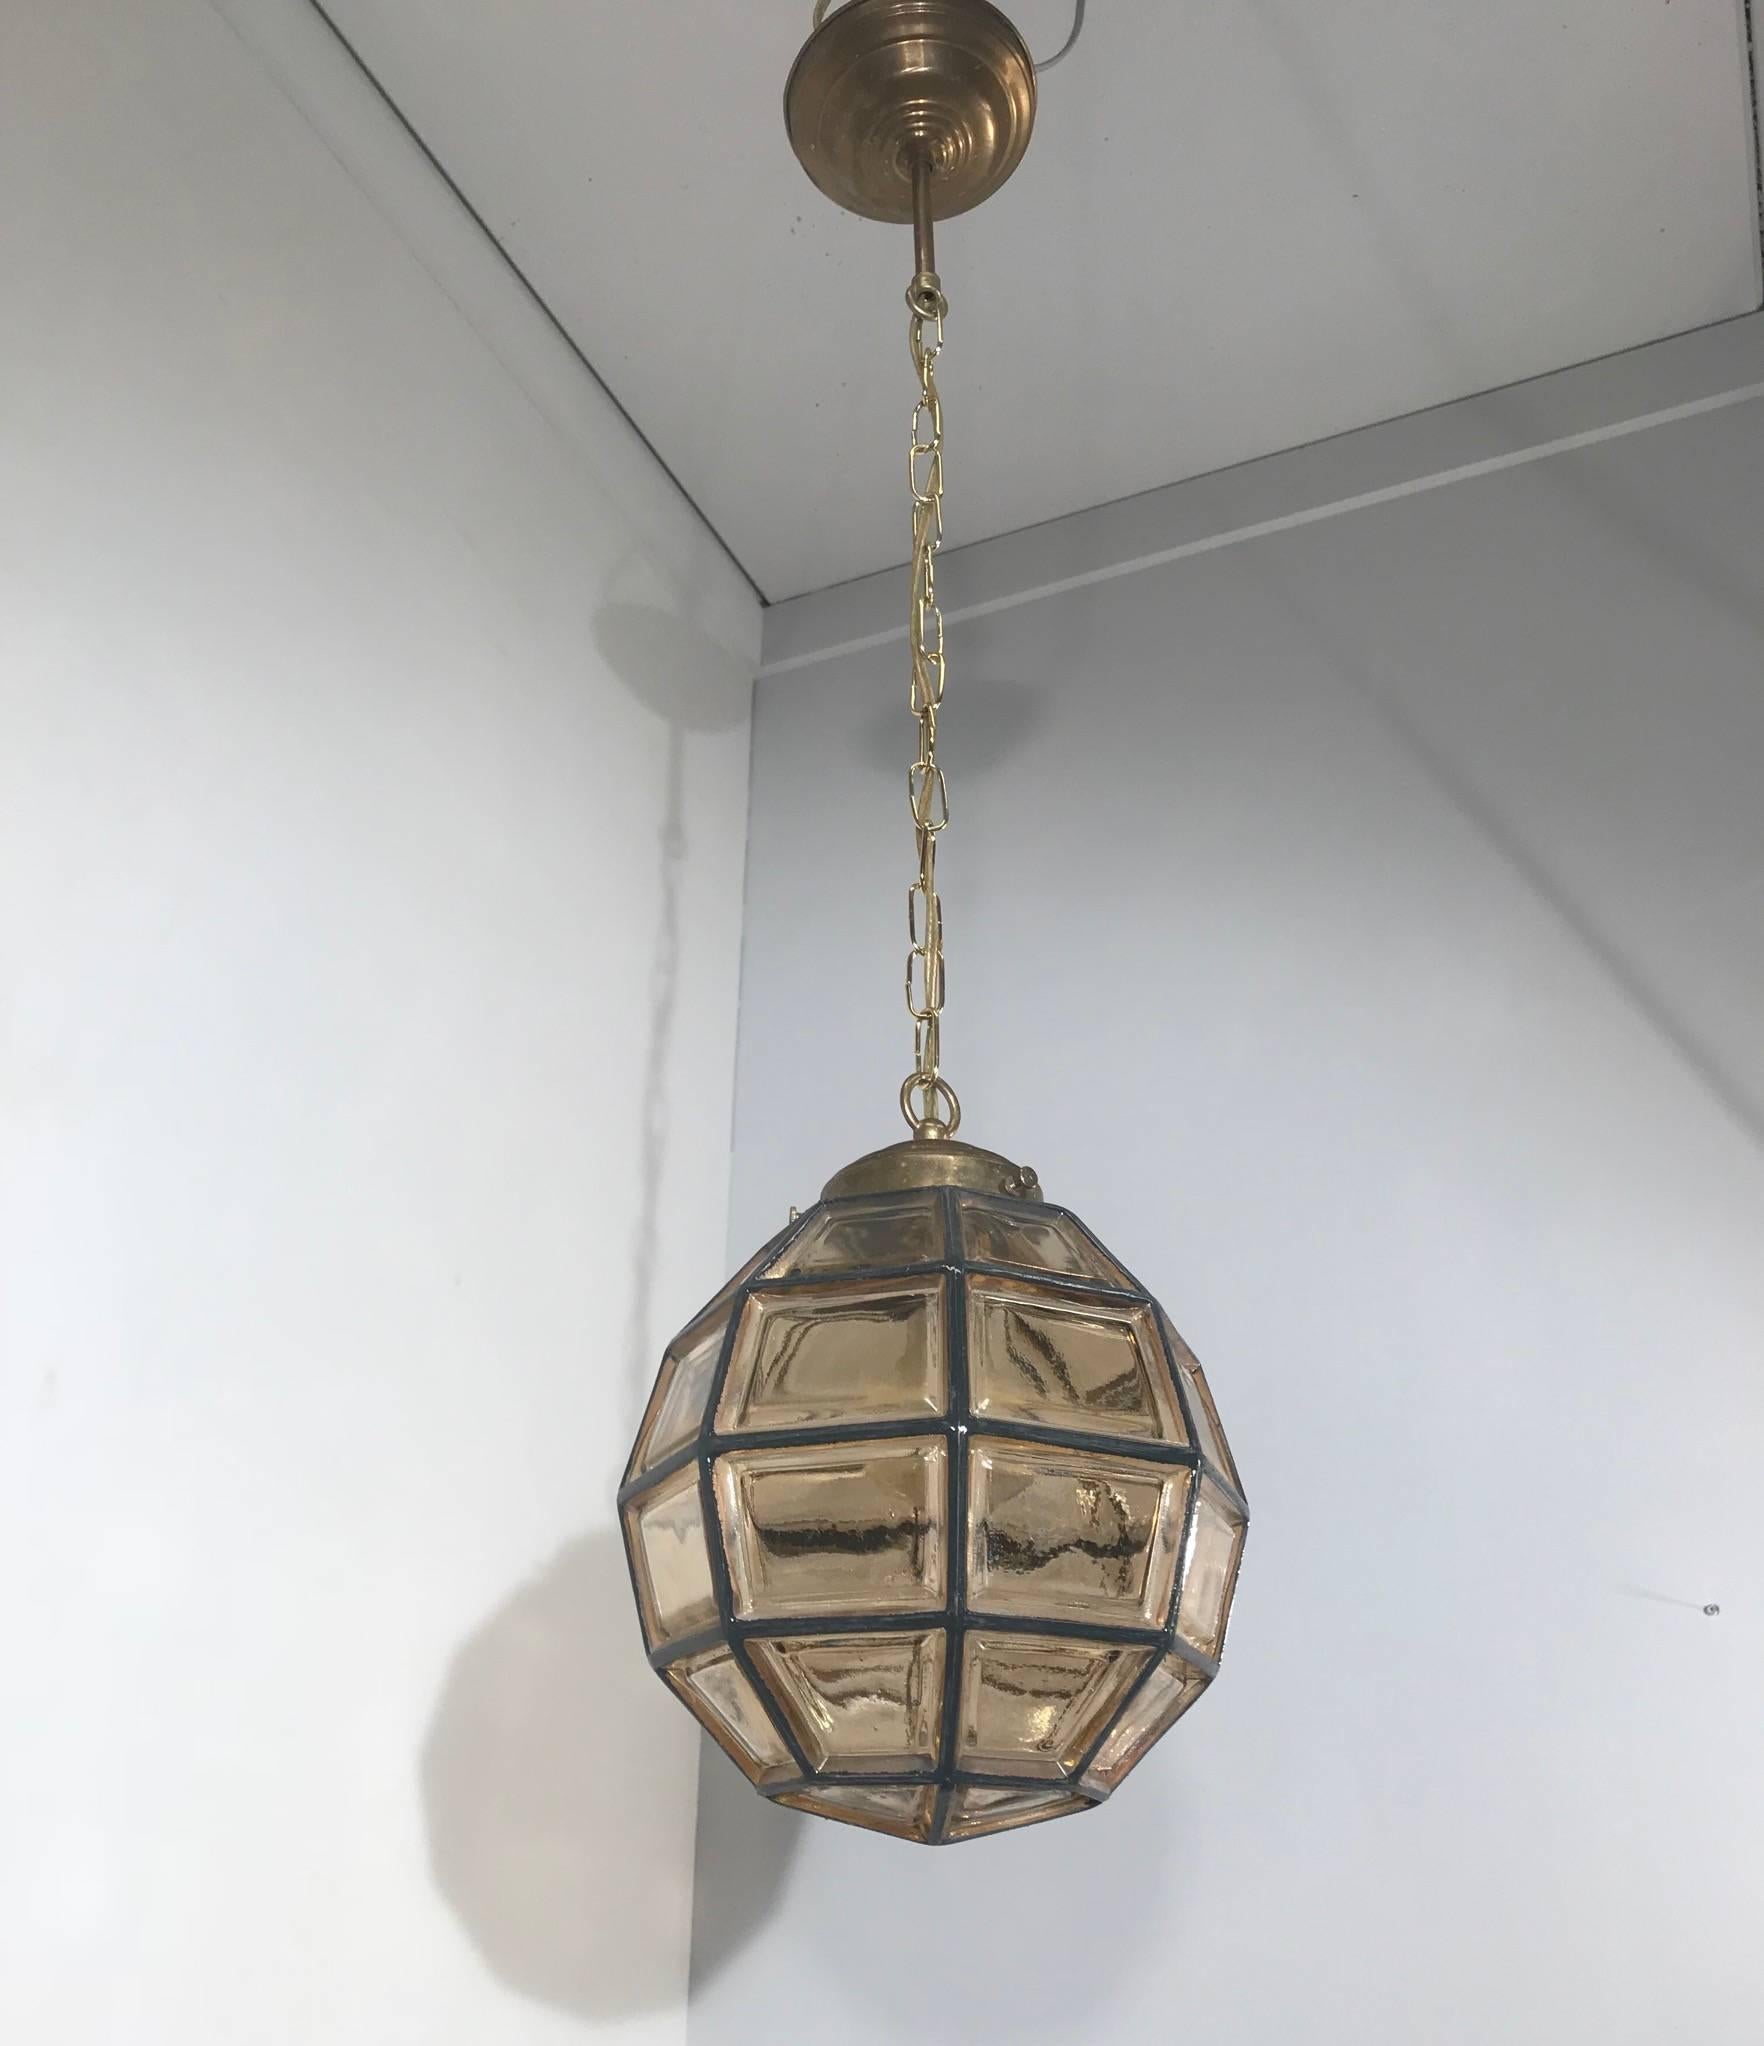 Timeless and small size midcentury pendant by Glashütte Limburg. 

This rare ceiling lamp from the midcentury era could be the perfect lighting solution for an entrance or any other small living space. This facetted-globe design is a rare sight and